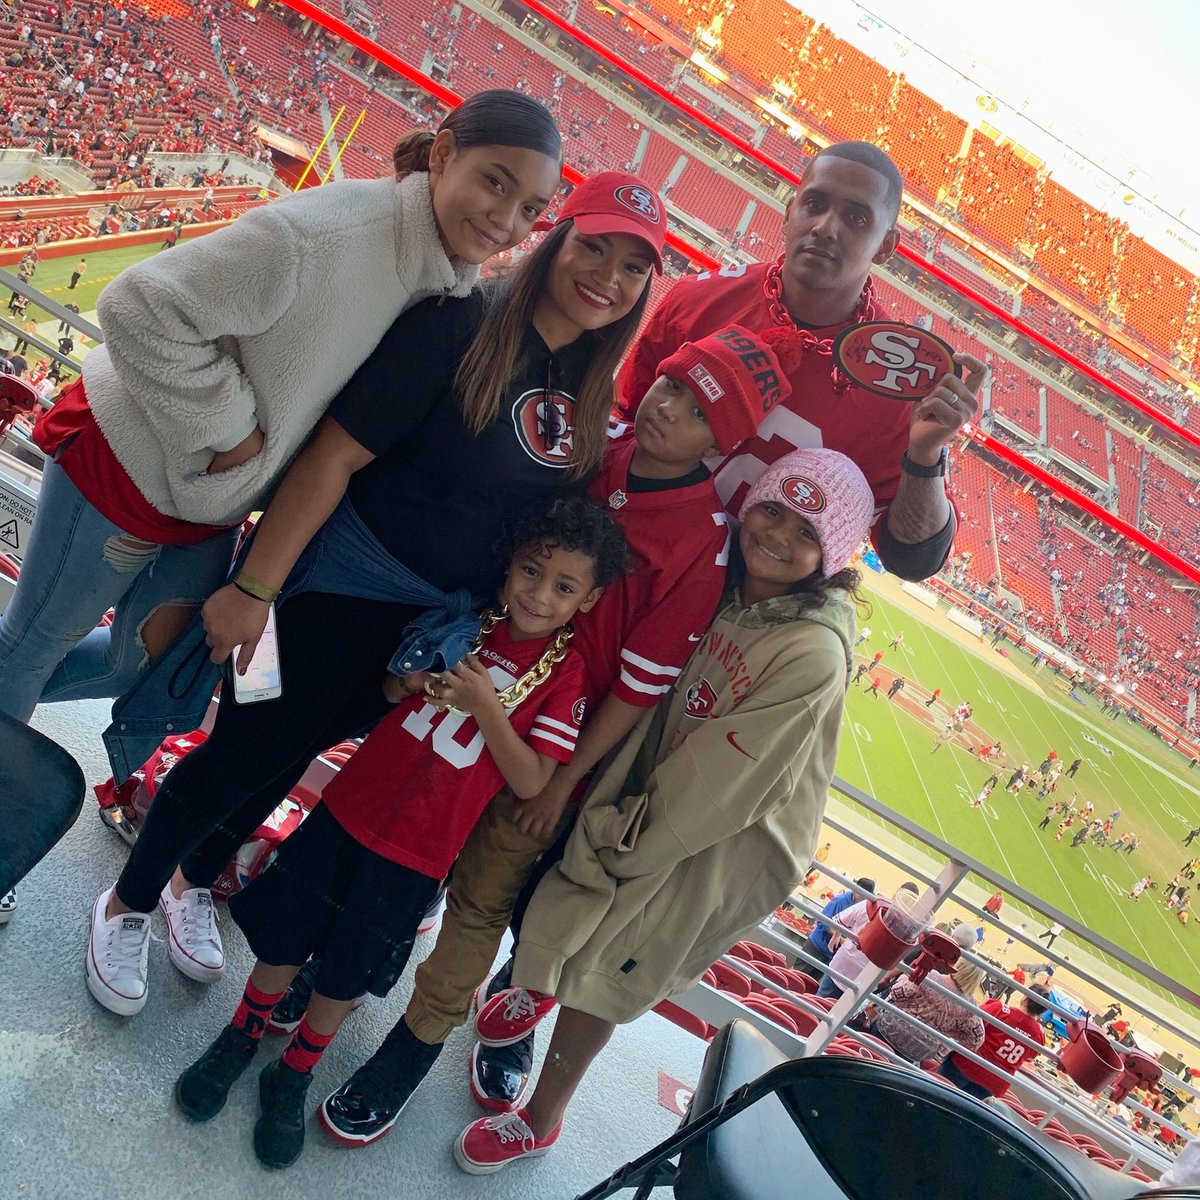 Shout out to the @49ers & @kympossible3 for making this possible. Thank you to everyone that continues to pray for & support CJ. #ContendForCJ #BeatDIPG